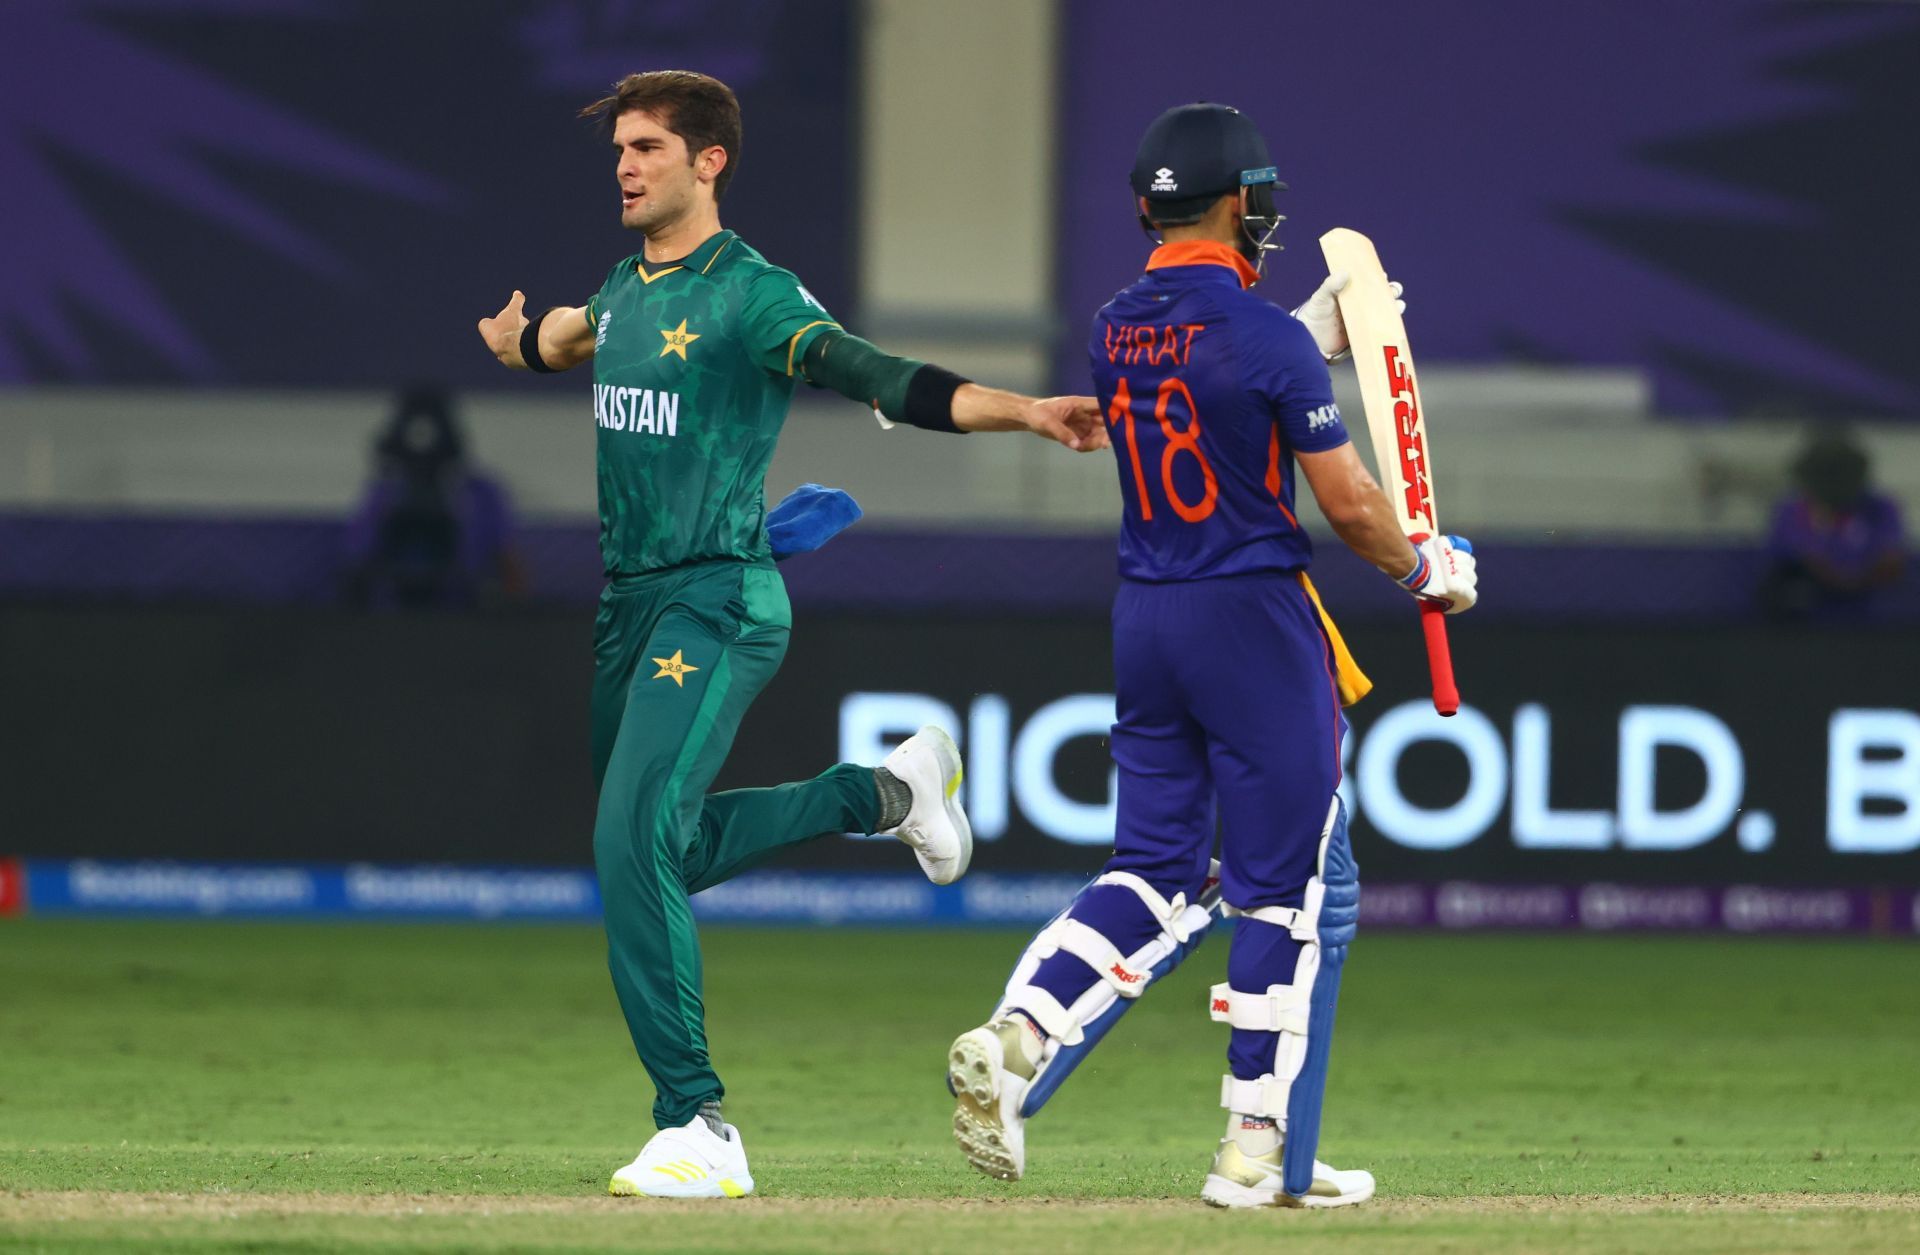 Pakistan secured a memorable win over India in the 2021 T20 World Cup